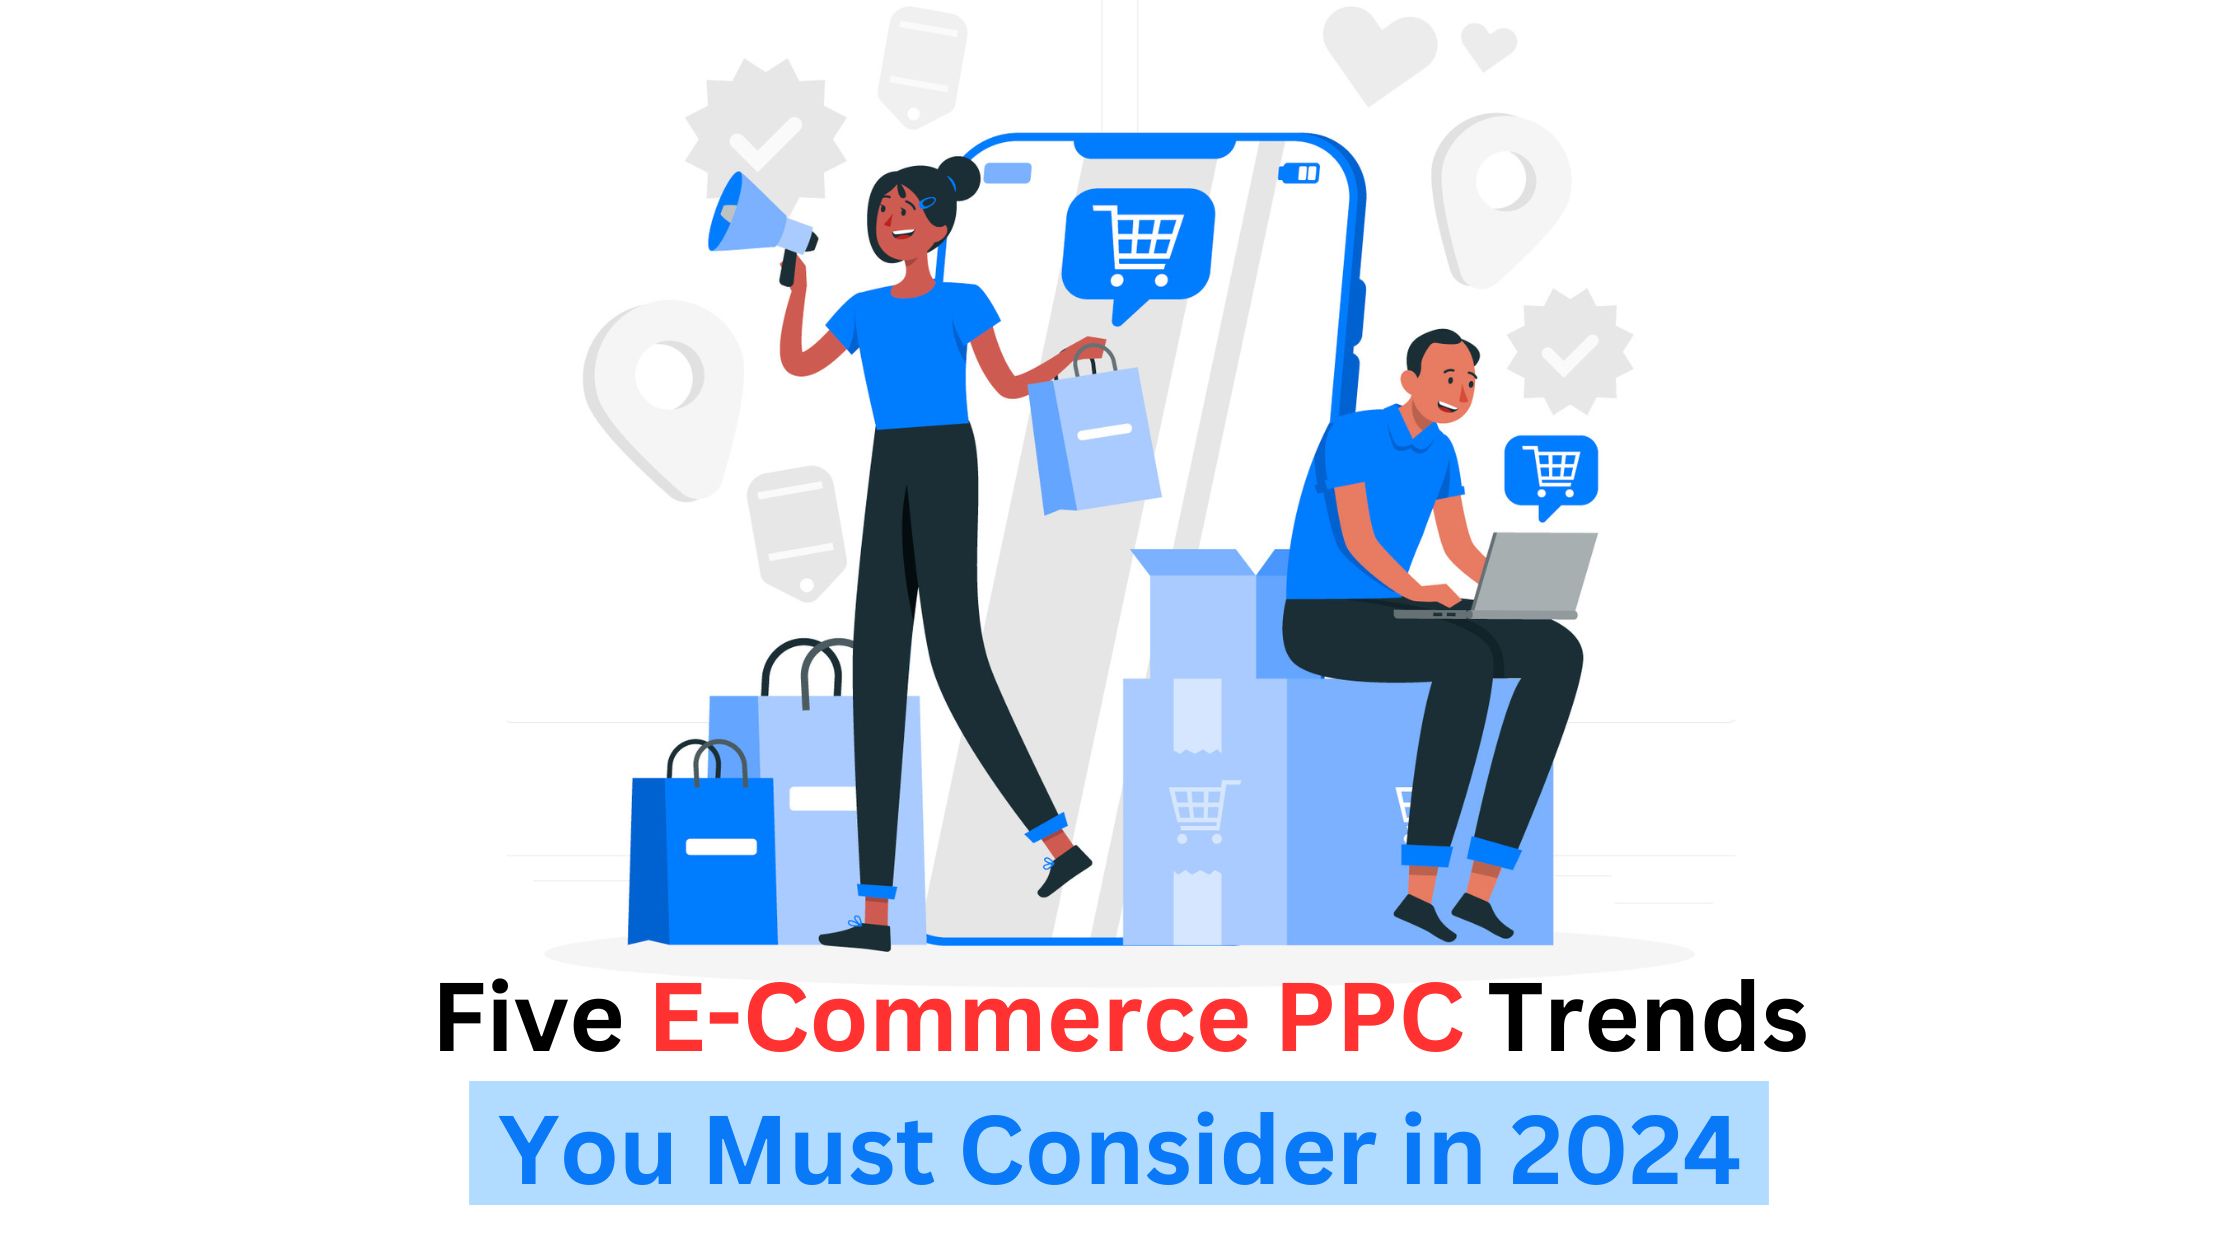 Five PPC Trends You Must Consider in 2024